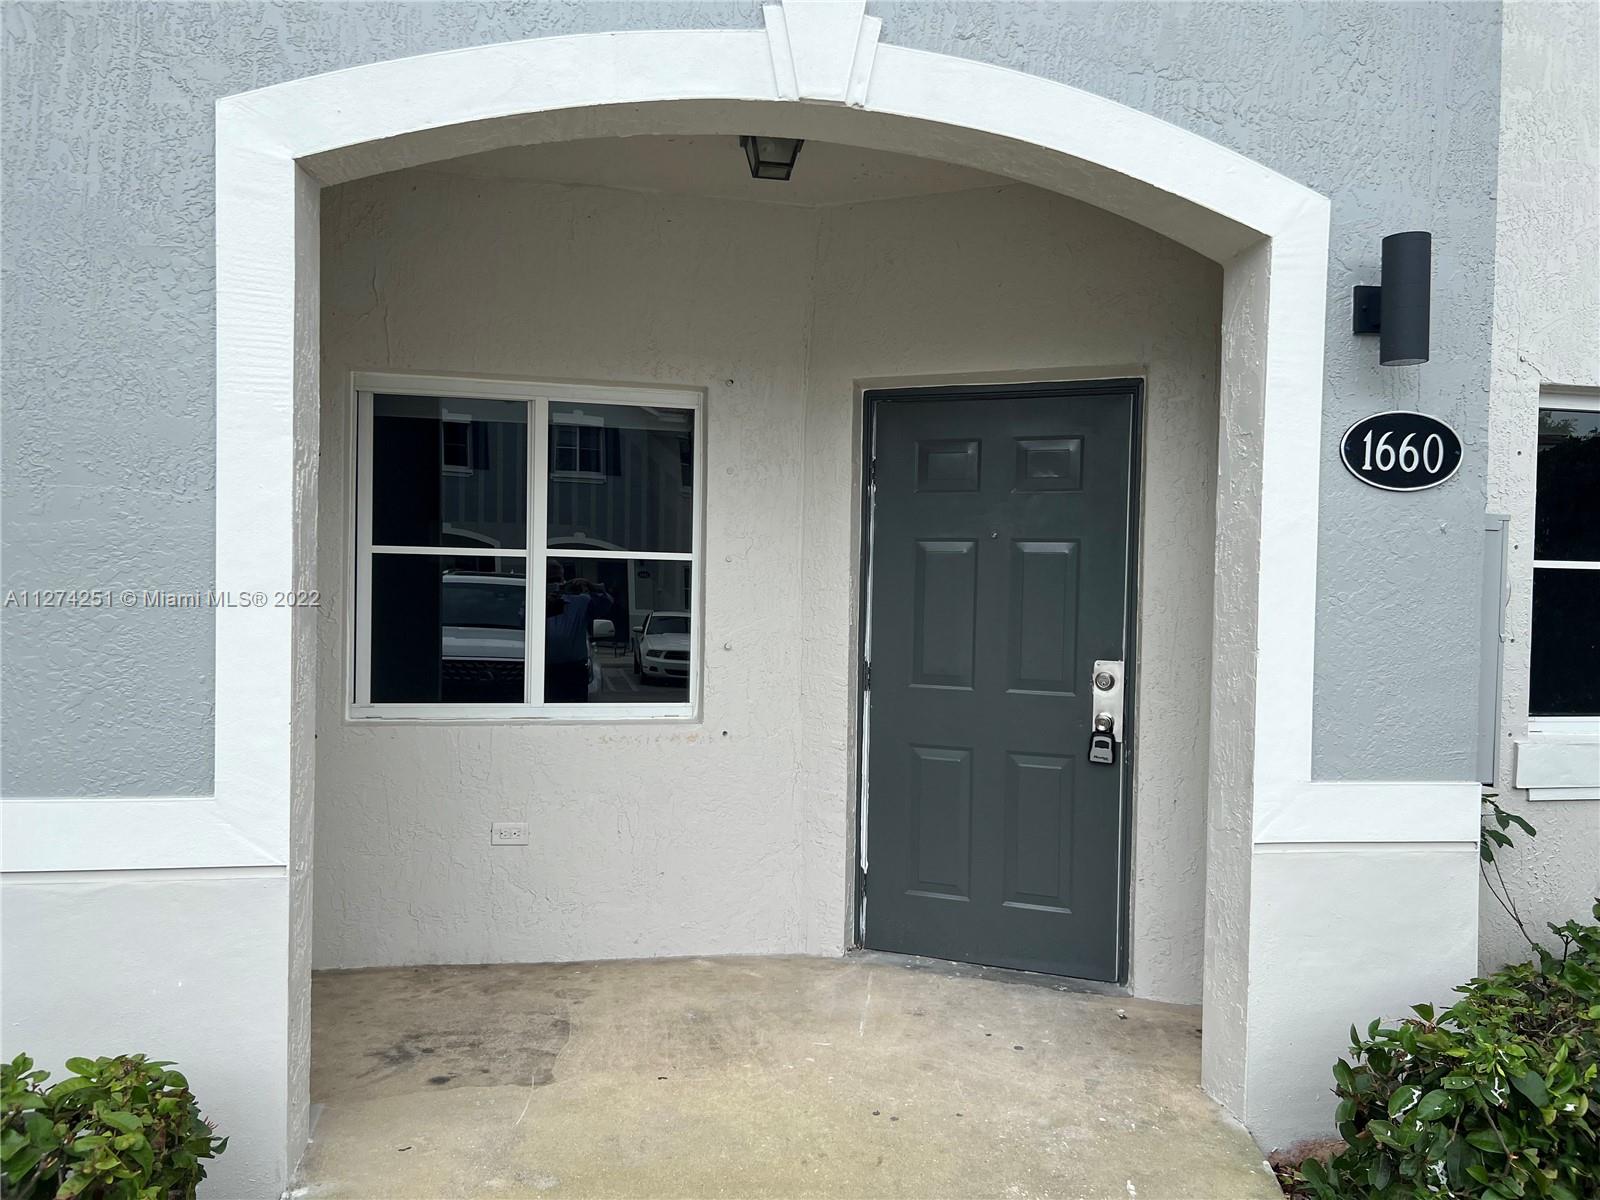 Beautiful townhouse facing the lake, remodeled, with updated kitchen, new floors, bathrooms, totally painted on the inside, new appliances, washes and dryer, a must see this property won't last.